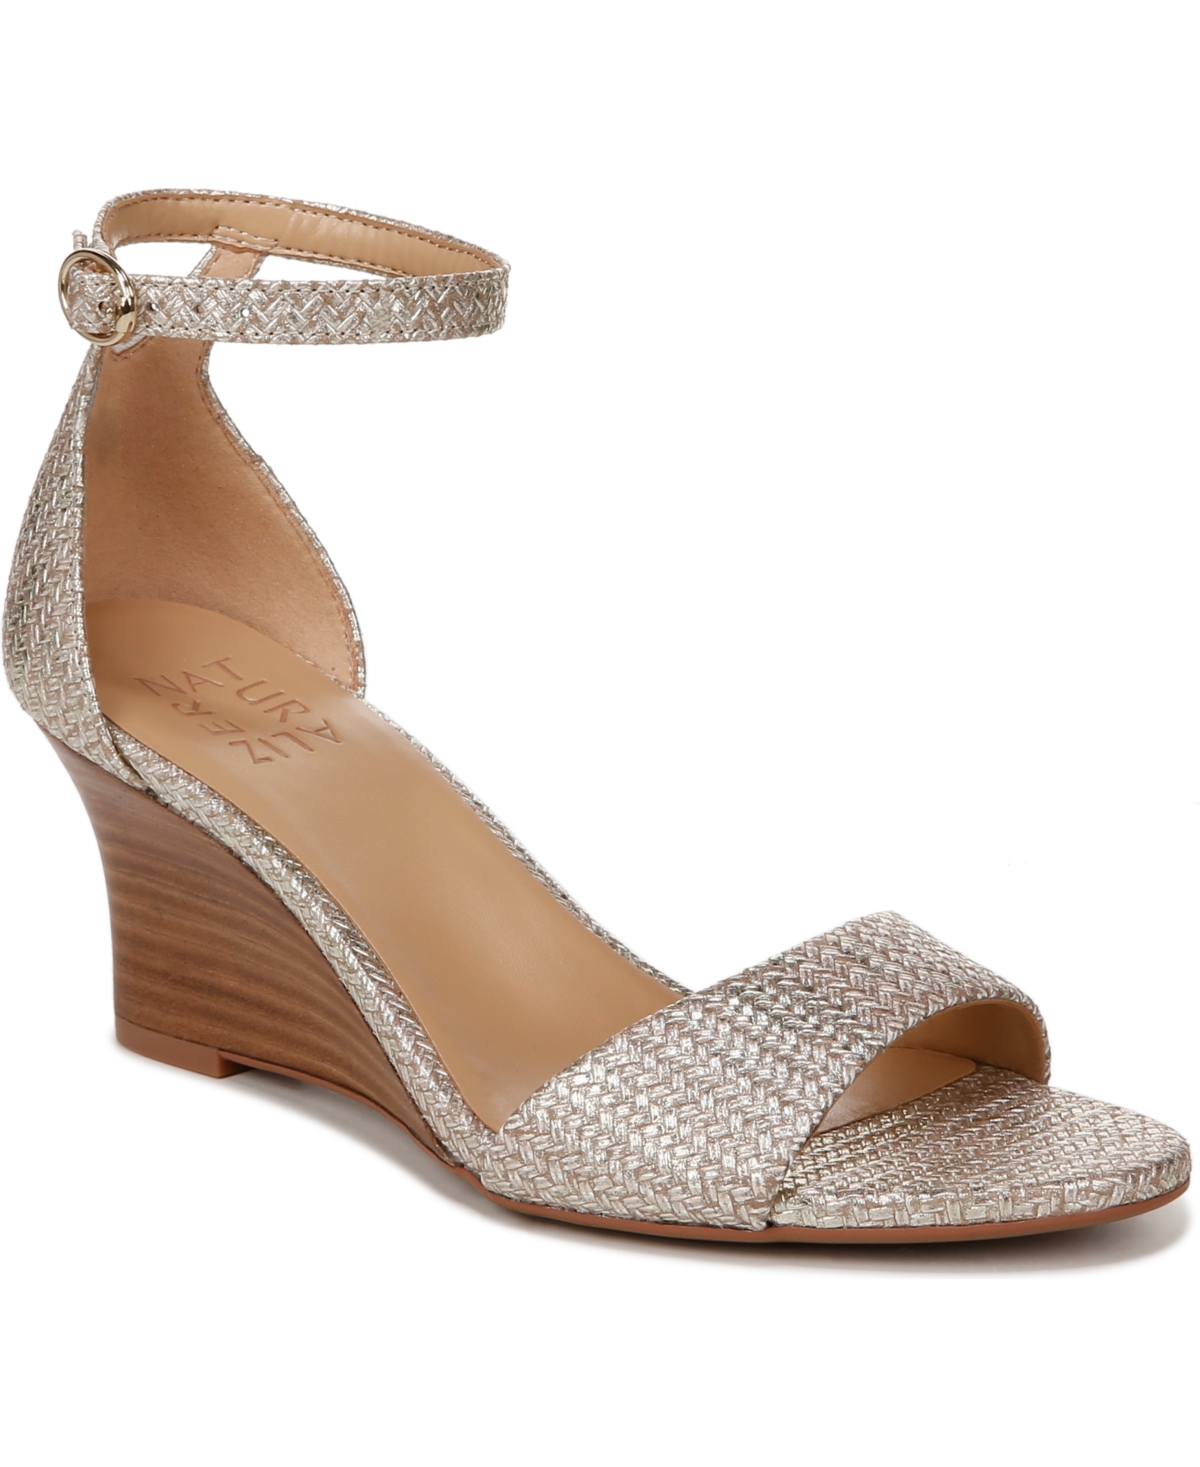 Shop Naturalizer Limited Edition Vera Ankle Strap Dress Sandals In Light Gold Woven Embossed Leather